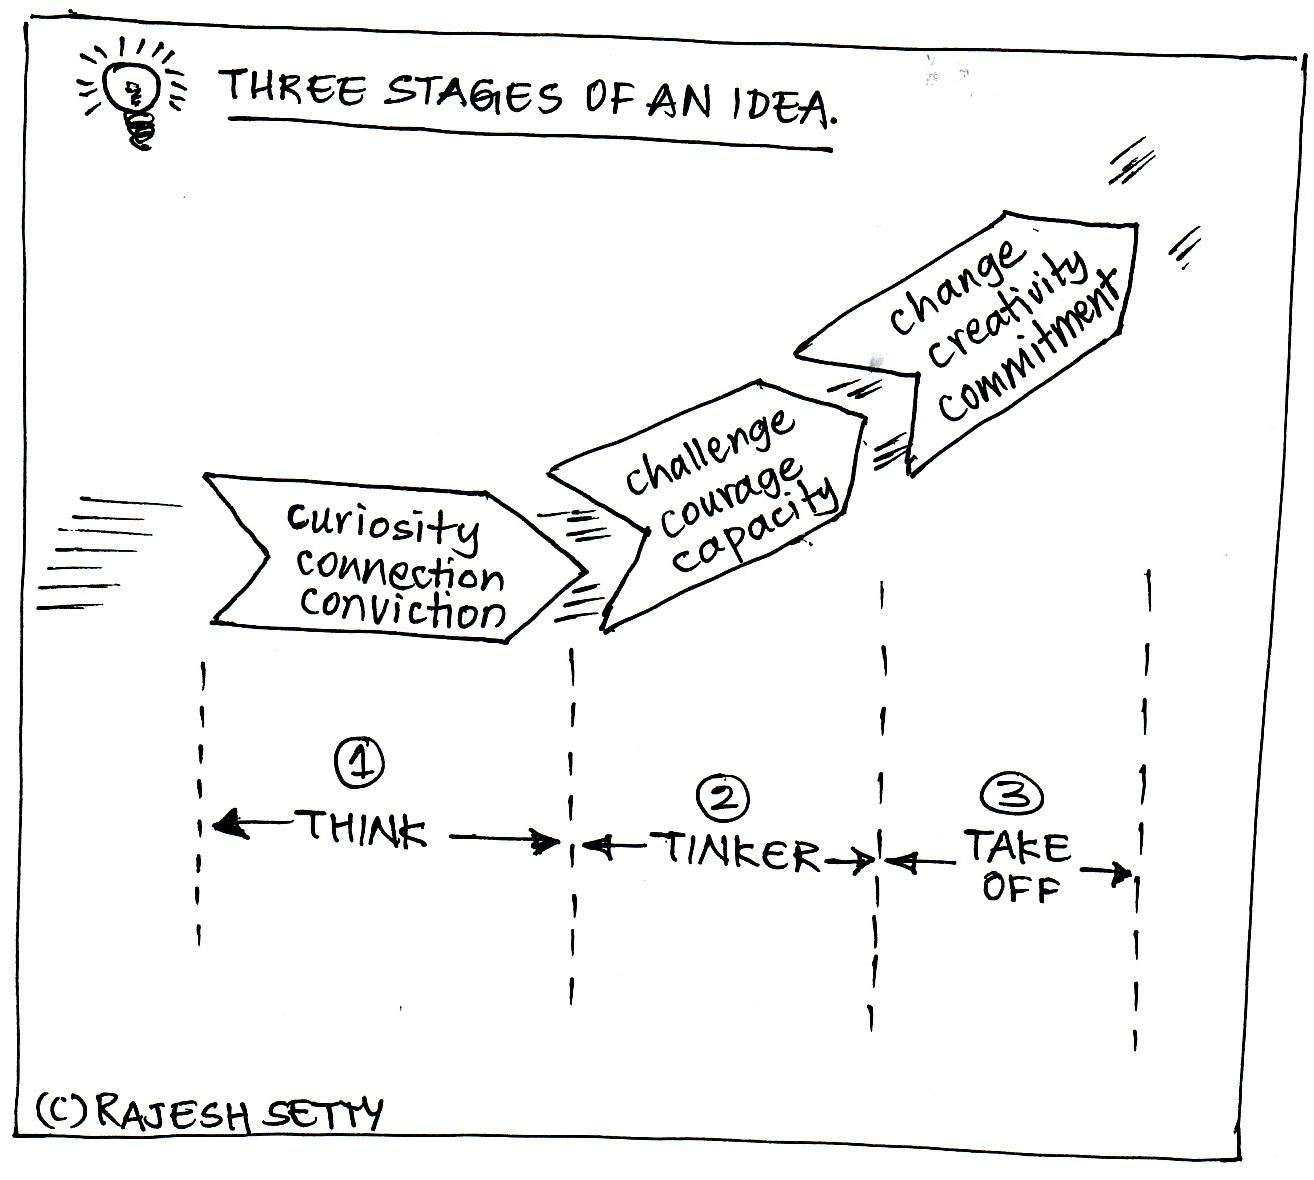 idea-stages